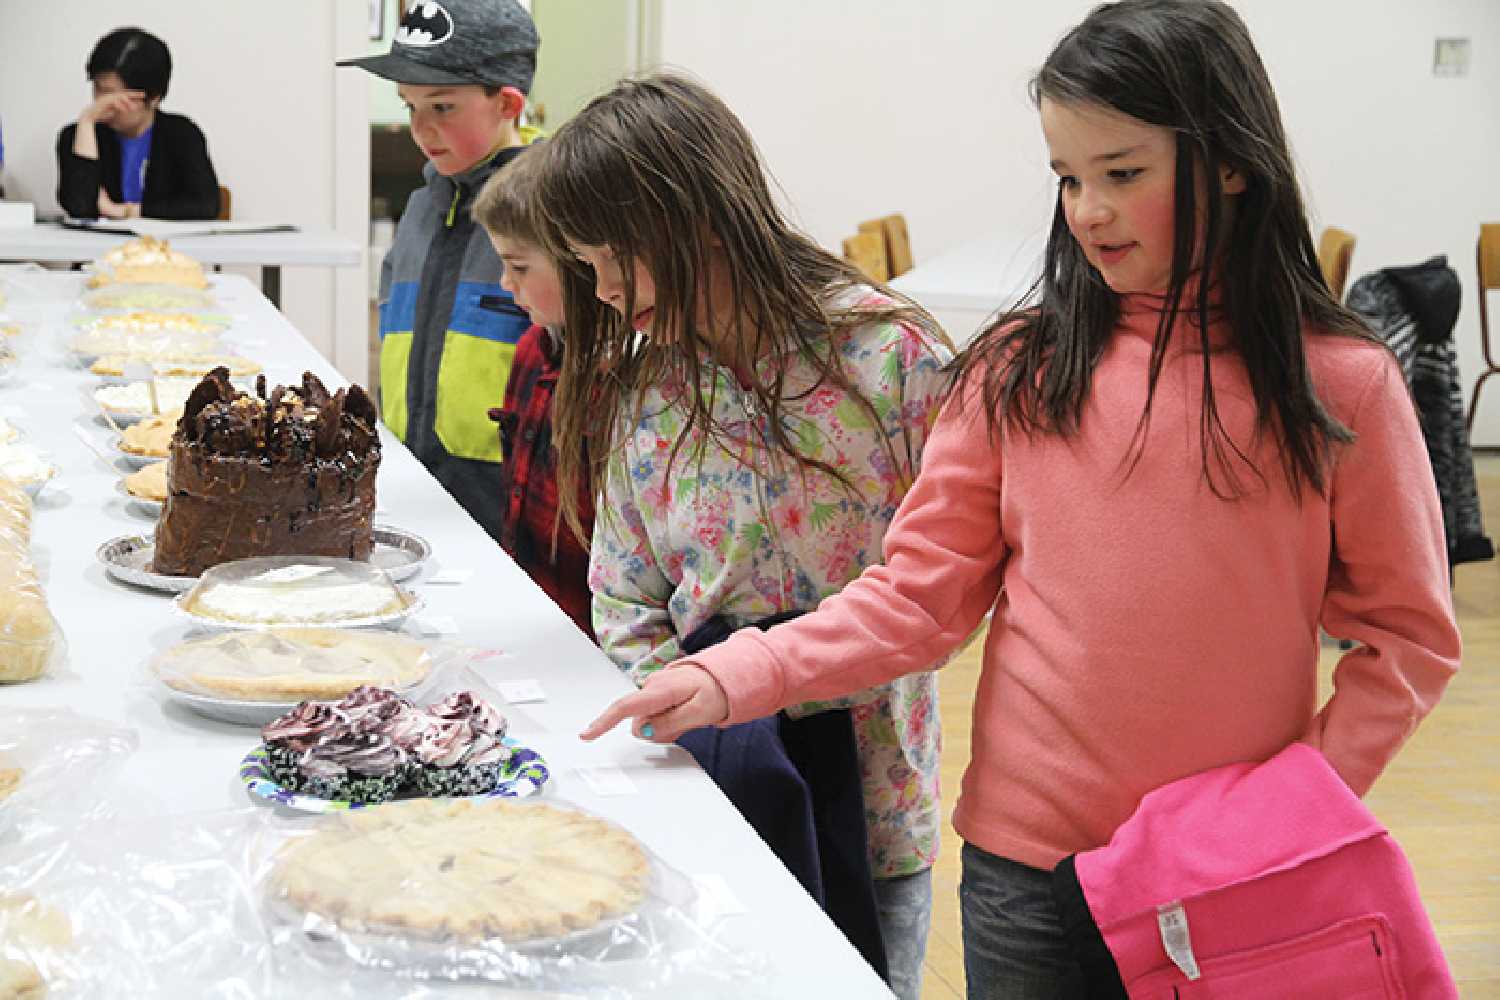 The annual Fleming Pie Auction will be happening from March 29 to 31 for the online portion of the event, and the in-person auction will be happening on Saturday, April 1 at the Fleming Hall at 7 p.m.